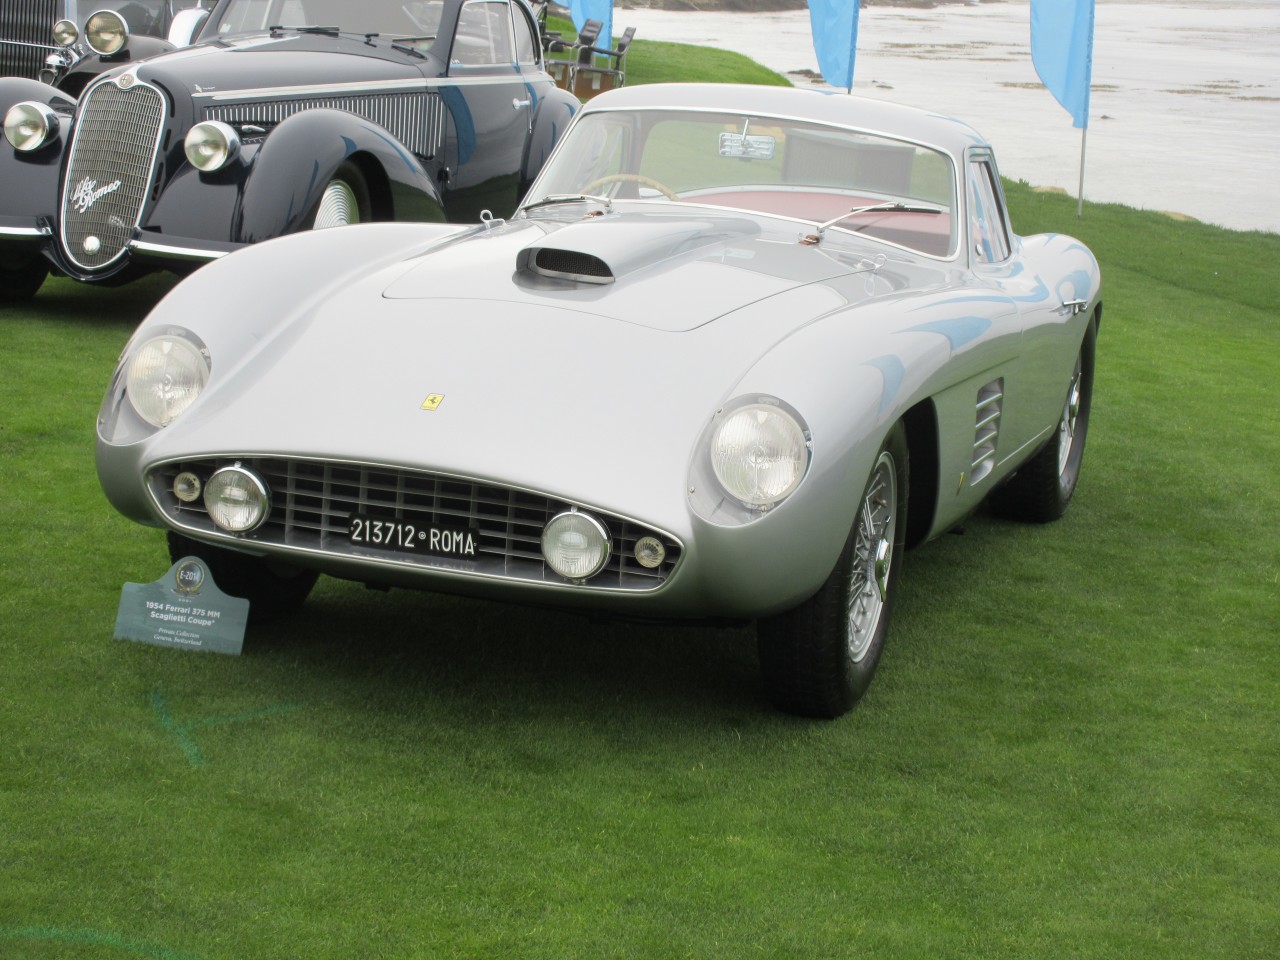 This 1954 Ferrari 375 MM Scaglietti Coupe (from a Private Collection based in Geneva, Switzerland) won "Best of Show" at the 2014 Pebble Beach Concours d’Elegance.